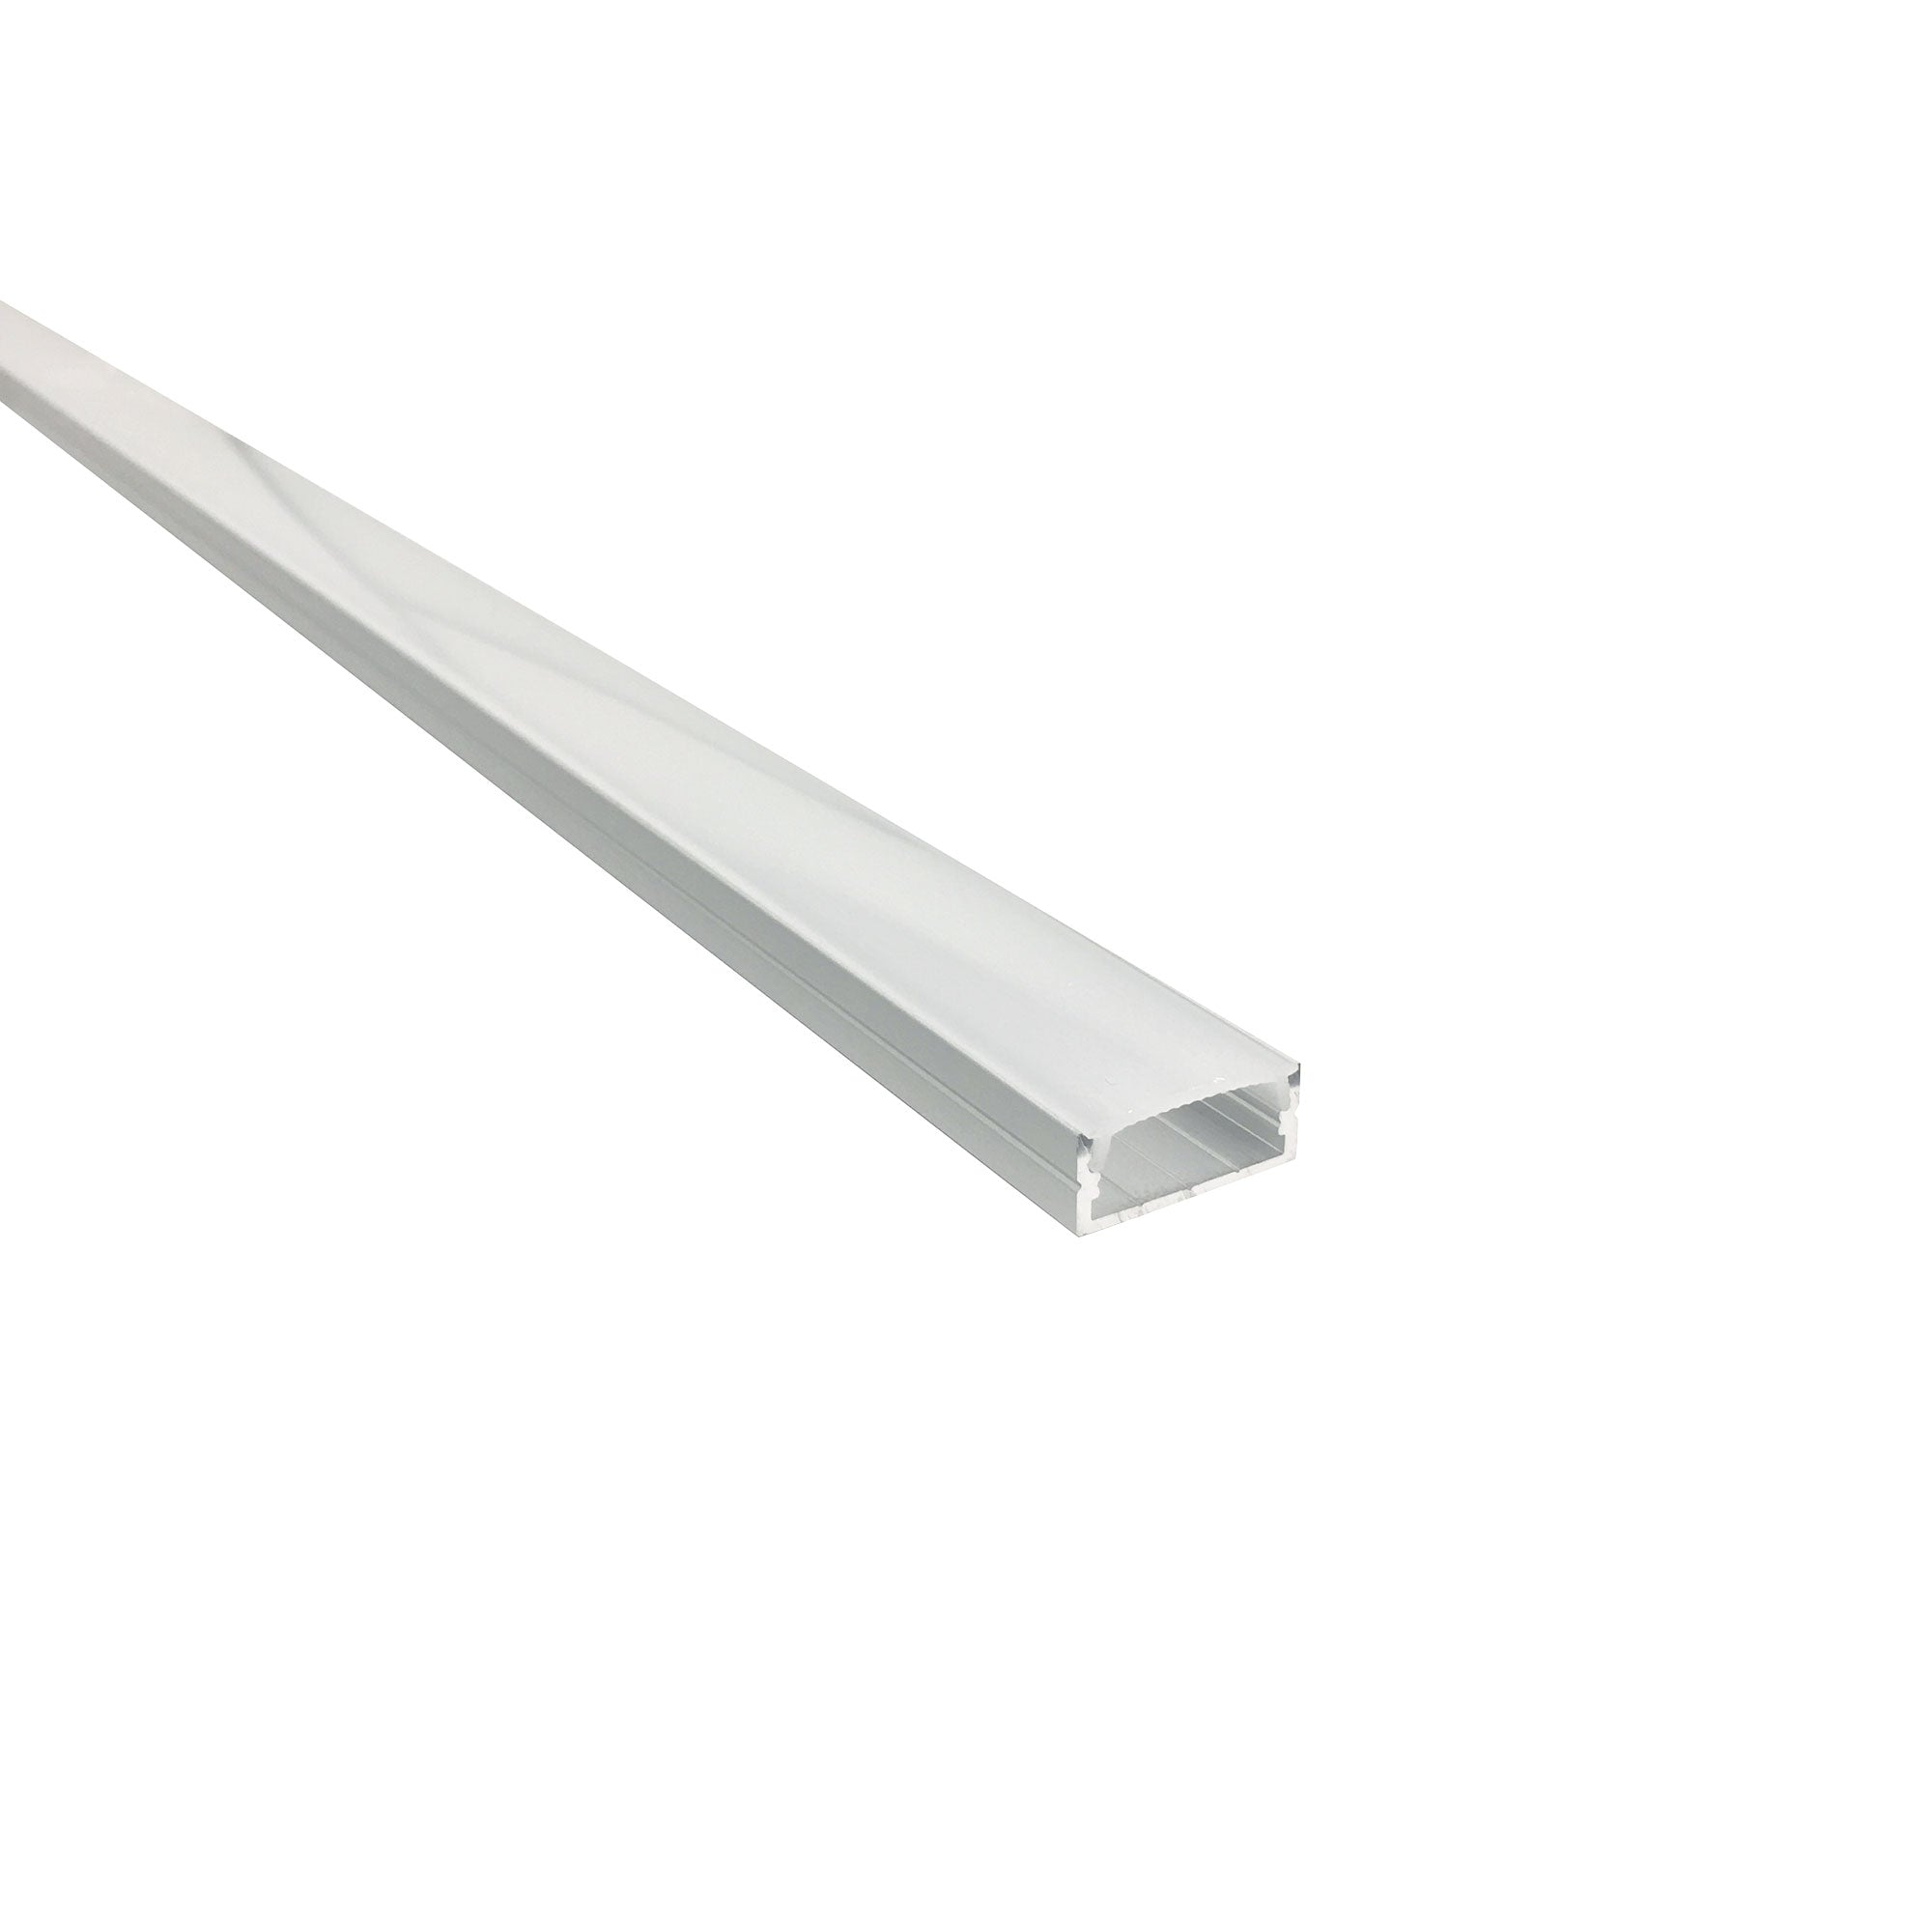 Nora Lighting NATL-C24A - Accent / Undercabinet - 4-ft Shallow Channel, Aluminum (Plastic Diffuser and End Caps Included)